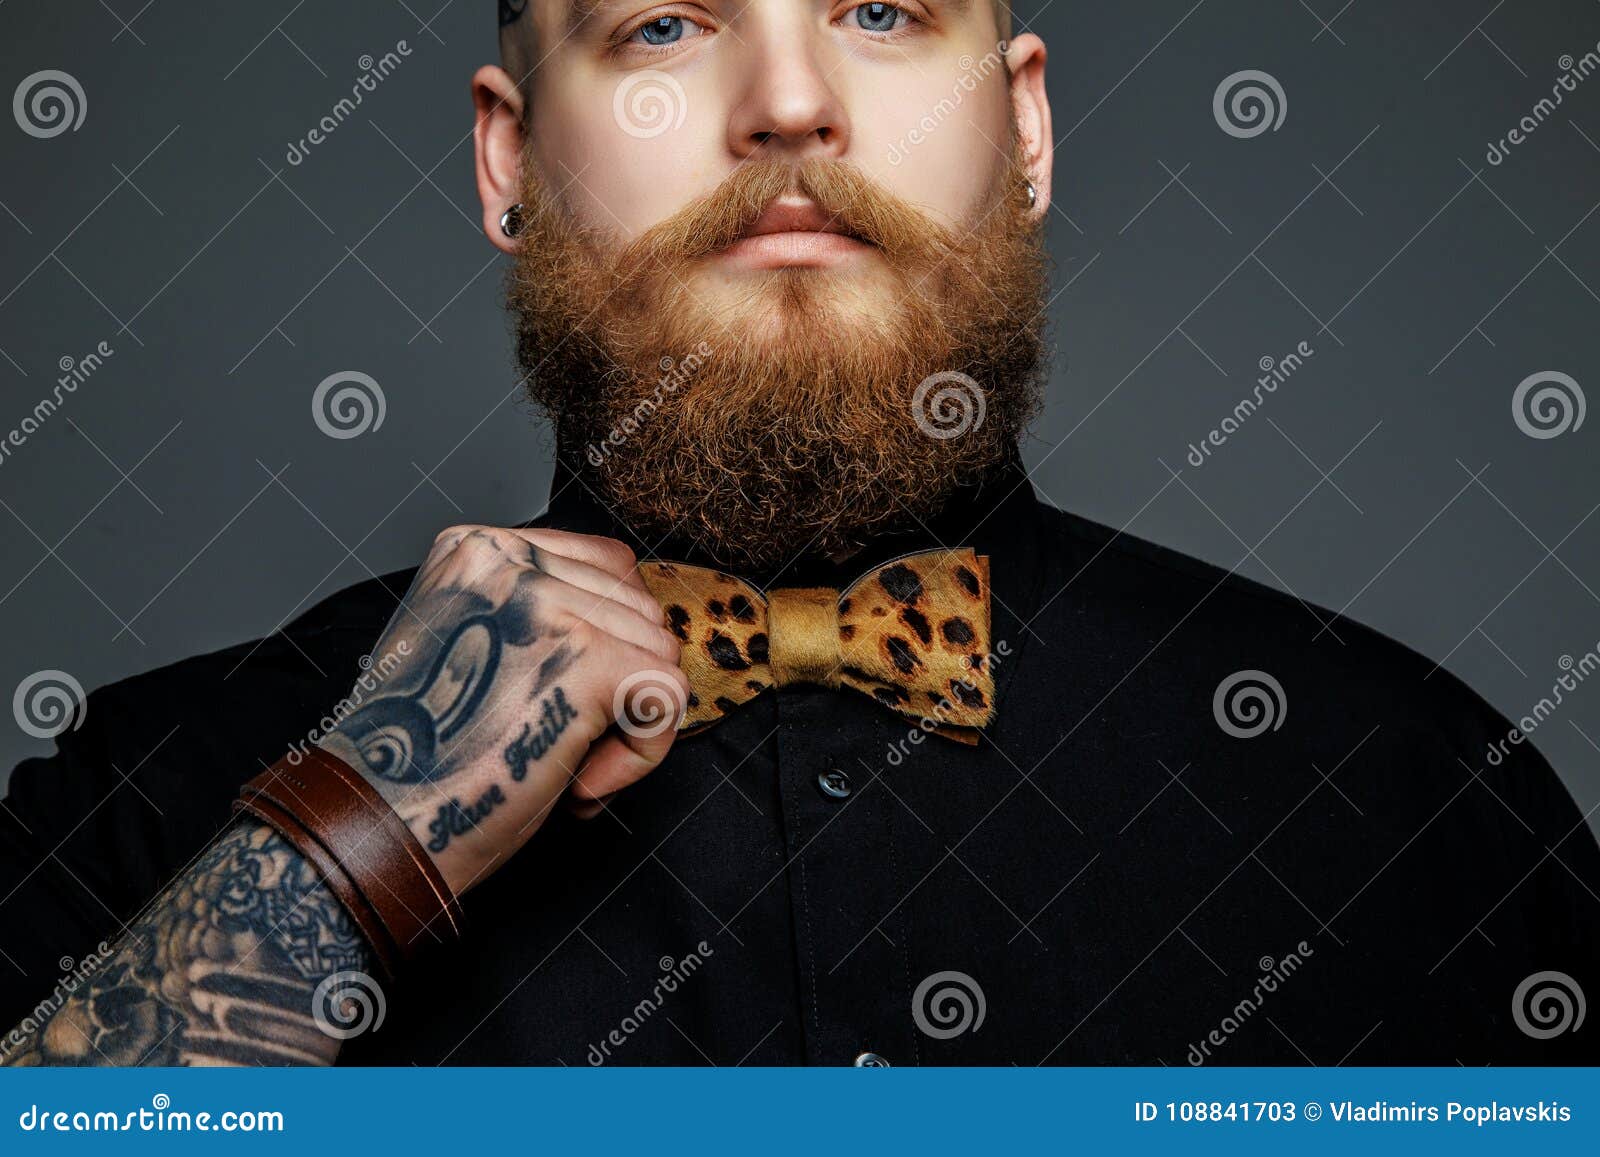 Man with Beard in Black T Shirt. Stock Image - Image of adult, bristle ...